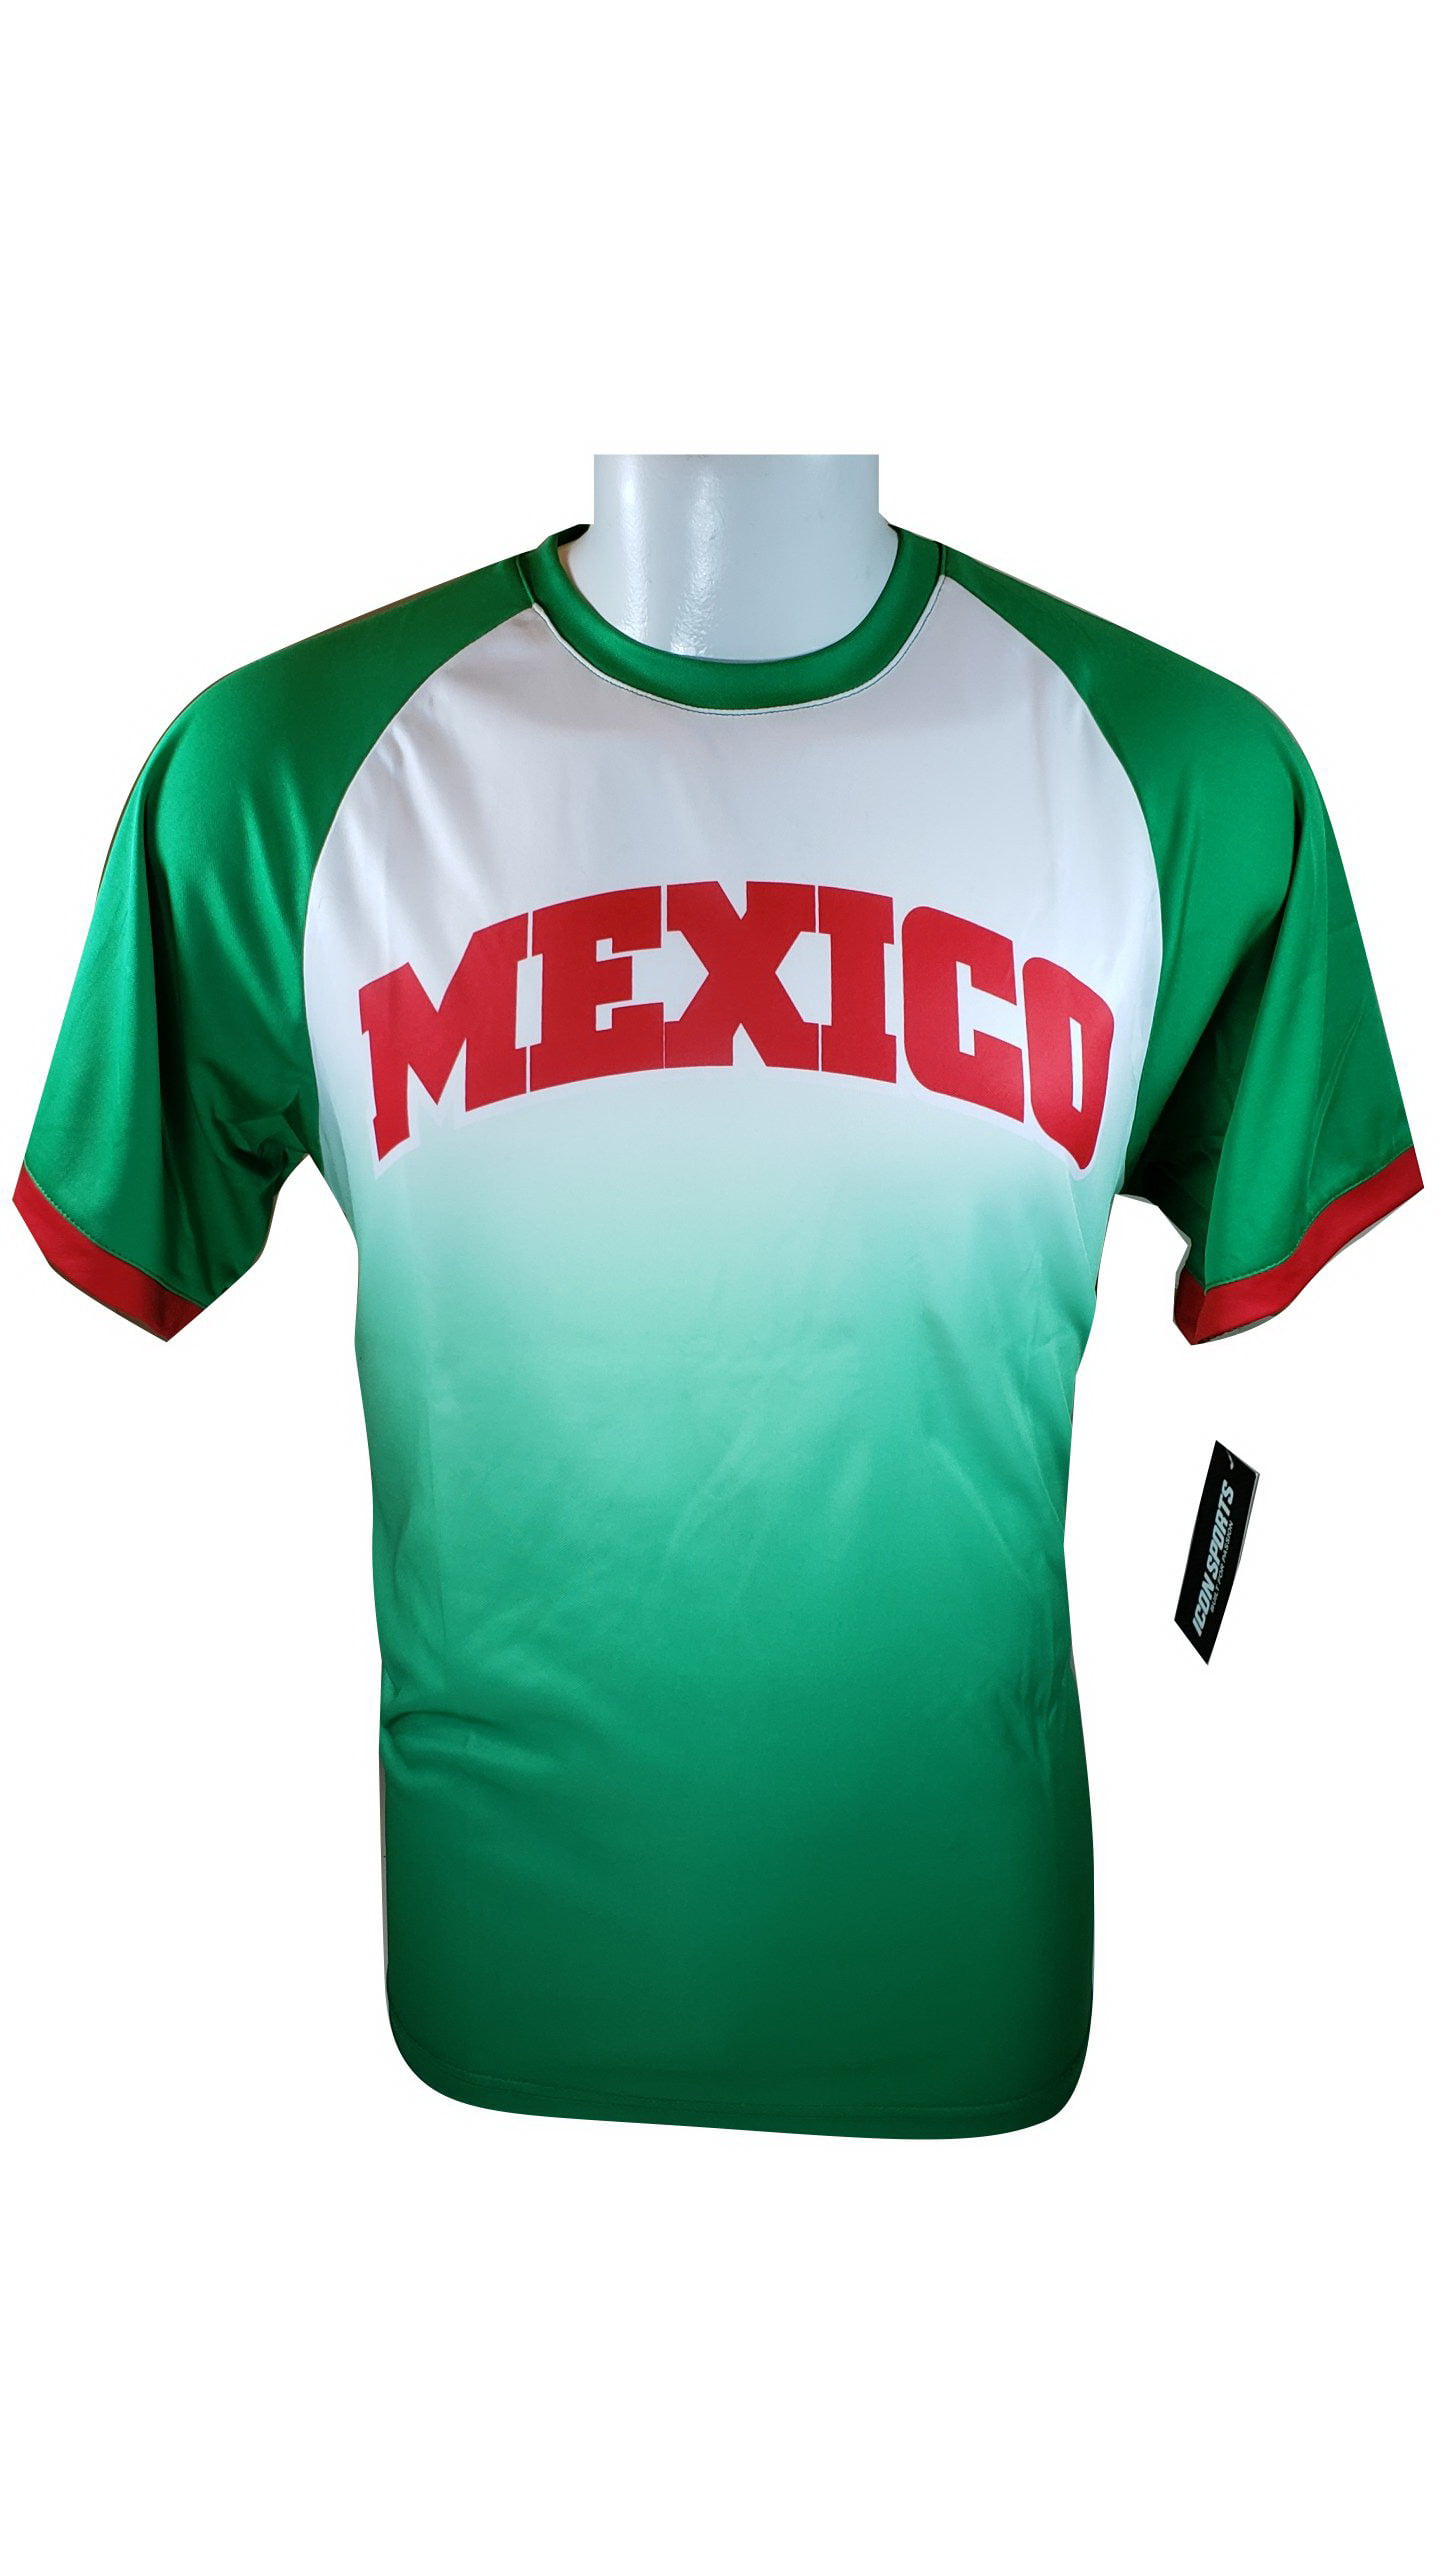 where can i buy a mexico soccer jersey